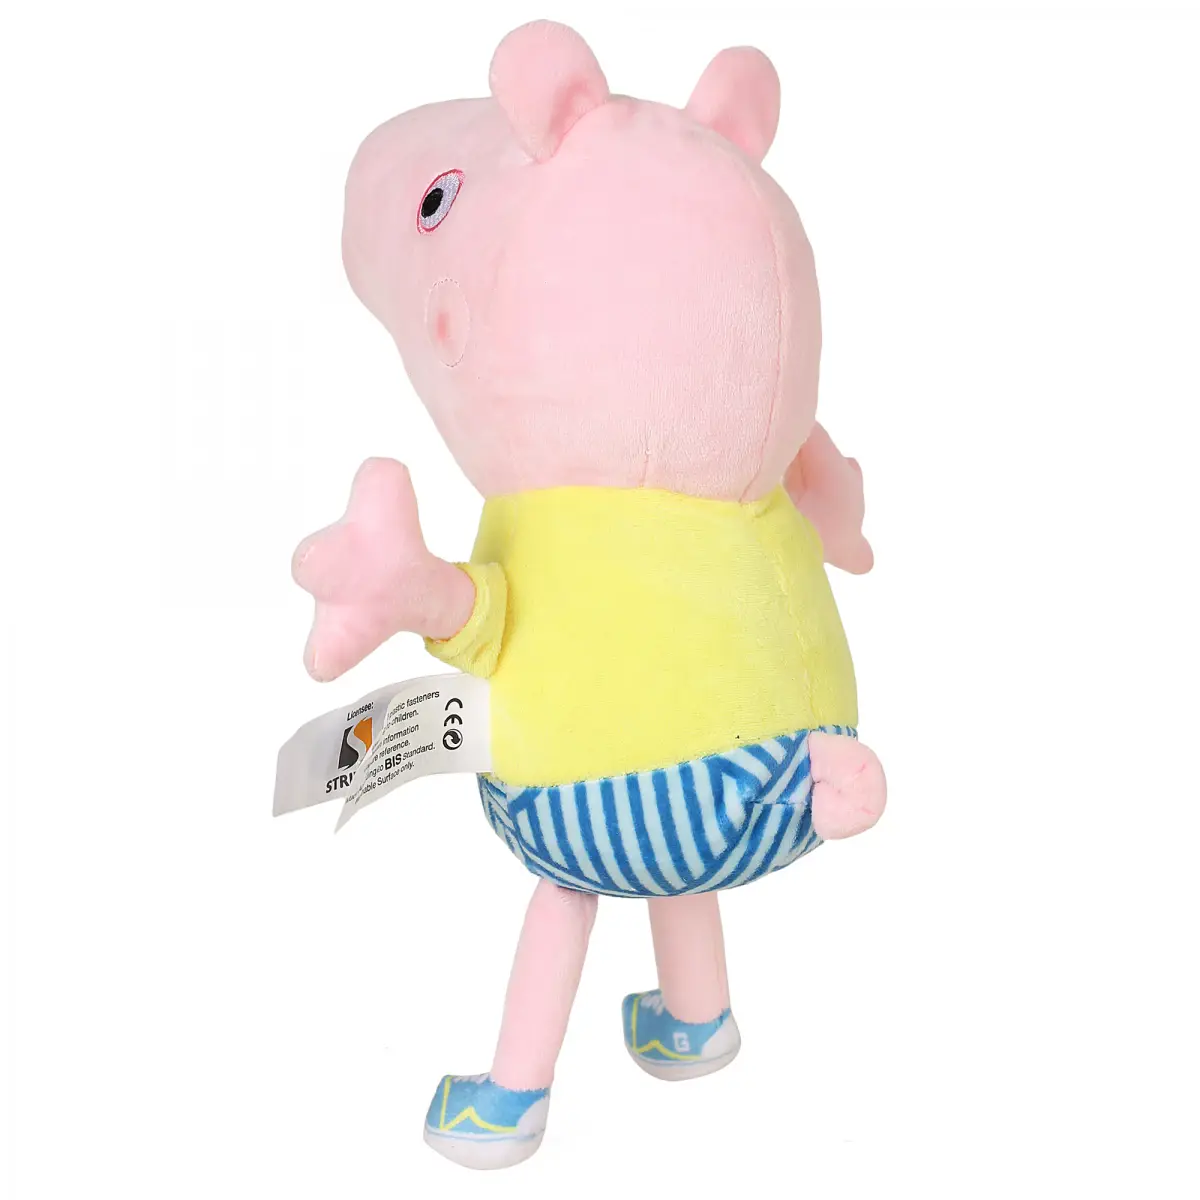 Peppa Pig George Pig Smiley Soft Toys for Kids, 30cm, 18M+, Multicolour